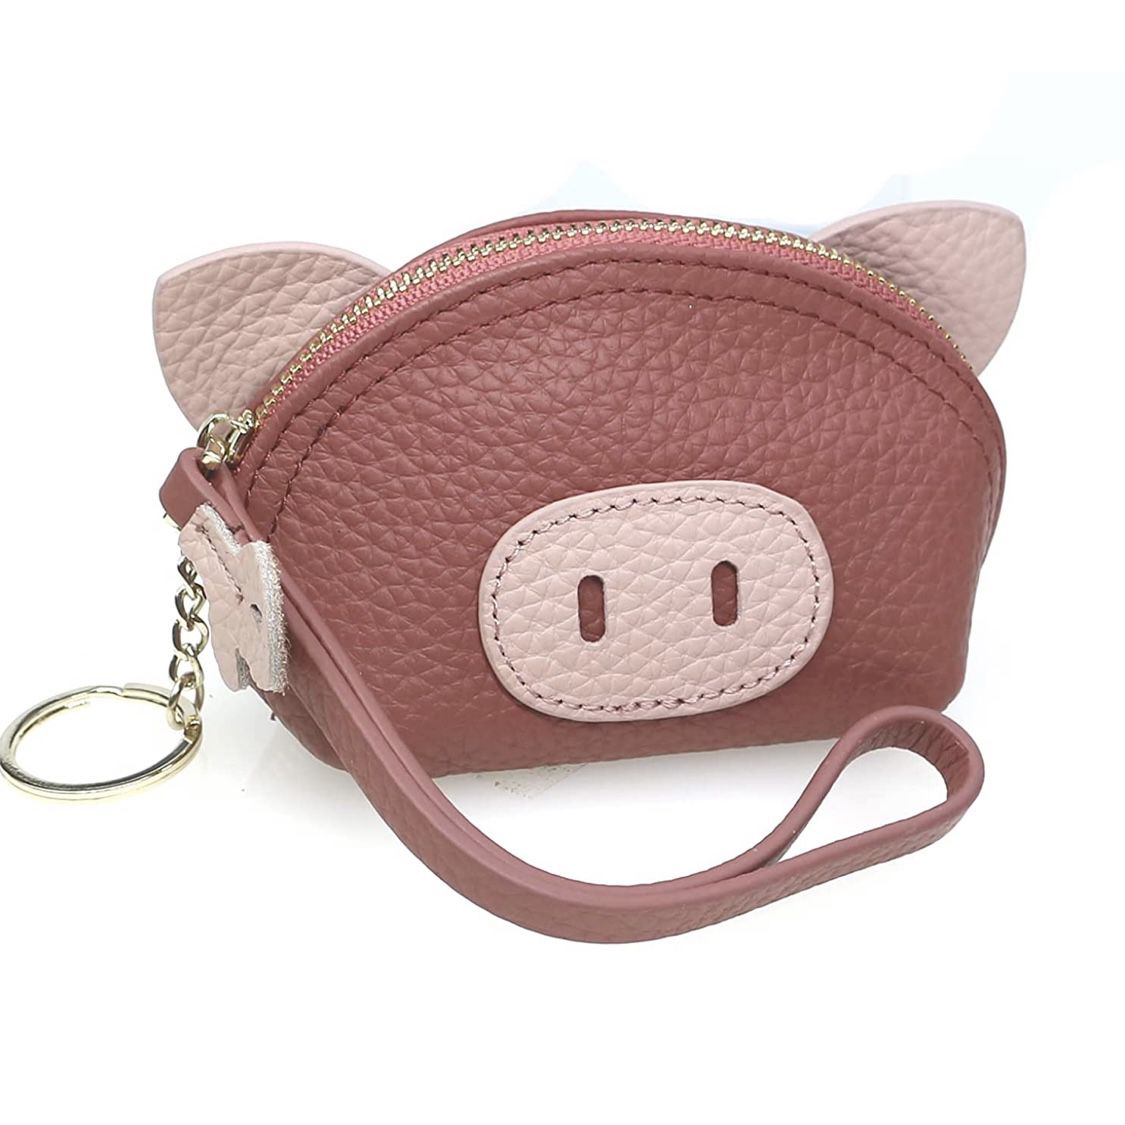 New-Cute Pig Small Mini Coin Purse for Women,100% Soft Genuine Leather Change Purse Wallet with Keychain and Zipper (Light red)